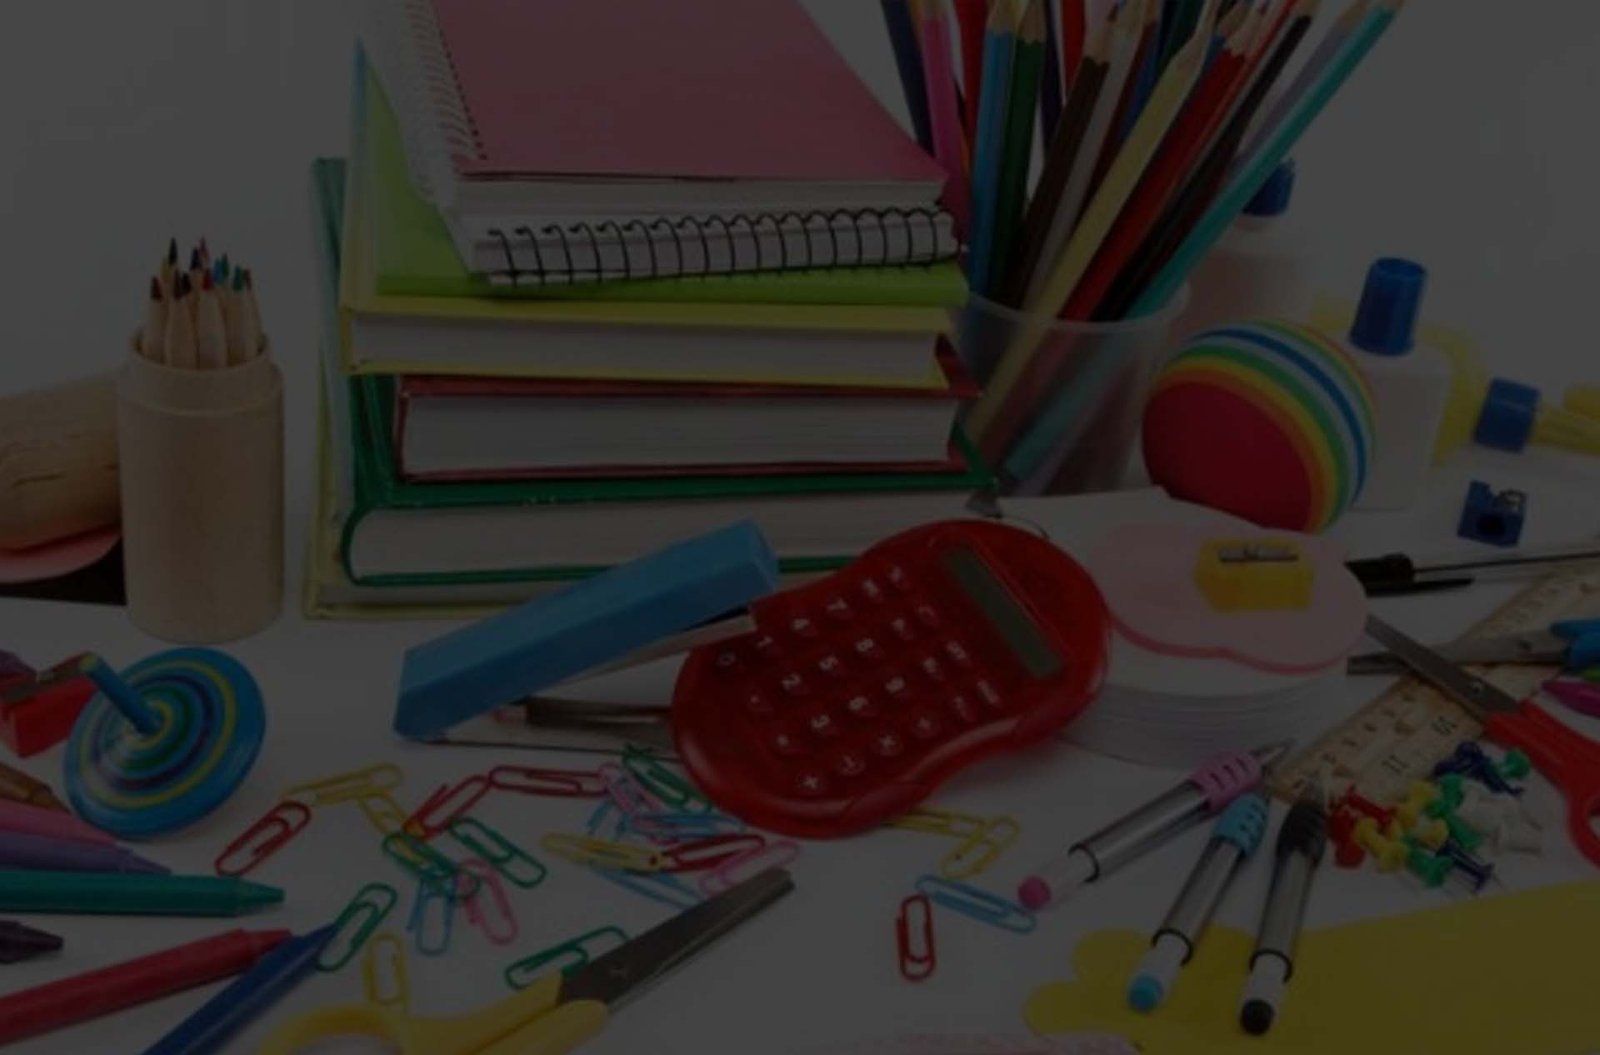 Stationery Products | Shiv Enterprises | Shiv Supplies | Office Stationery and Packaging Materials